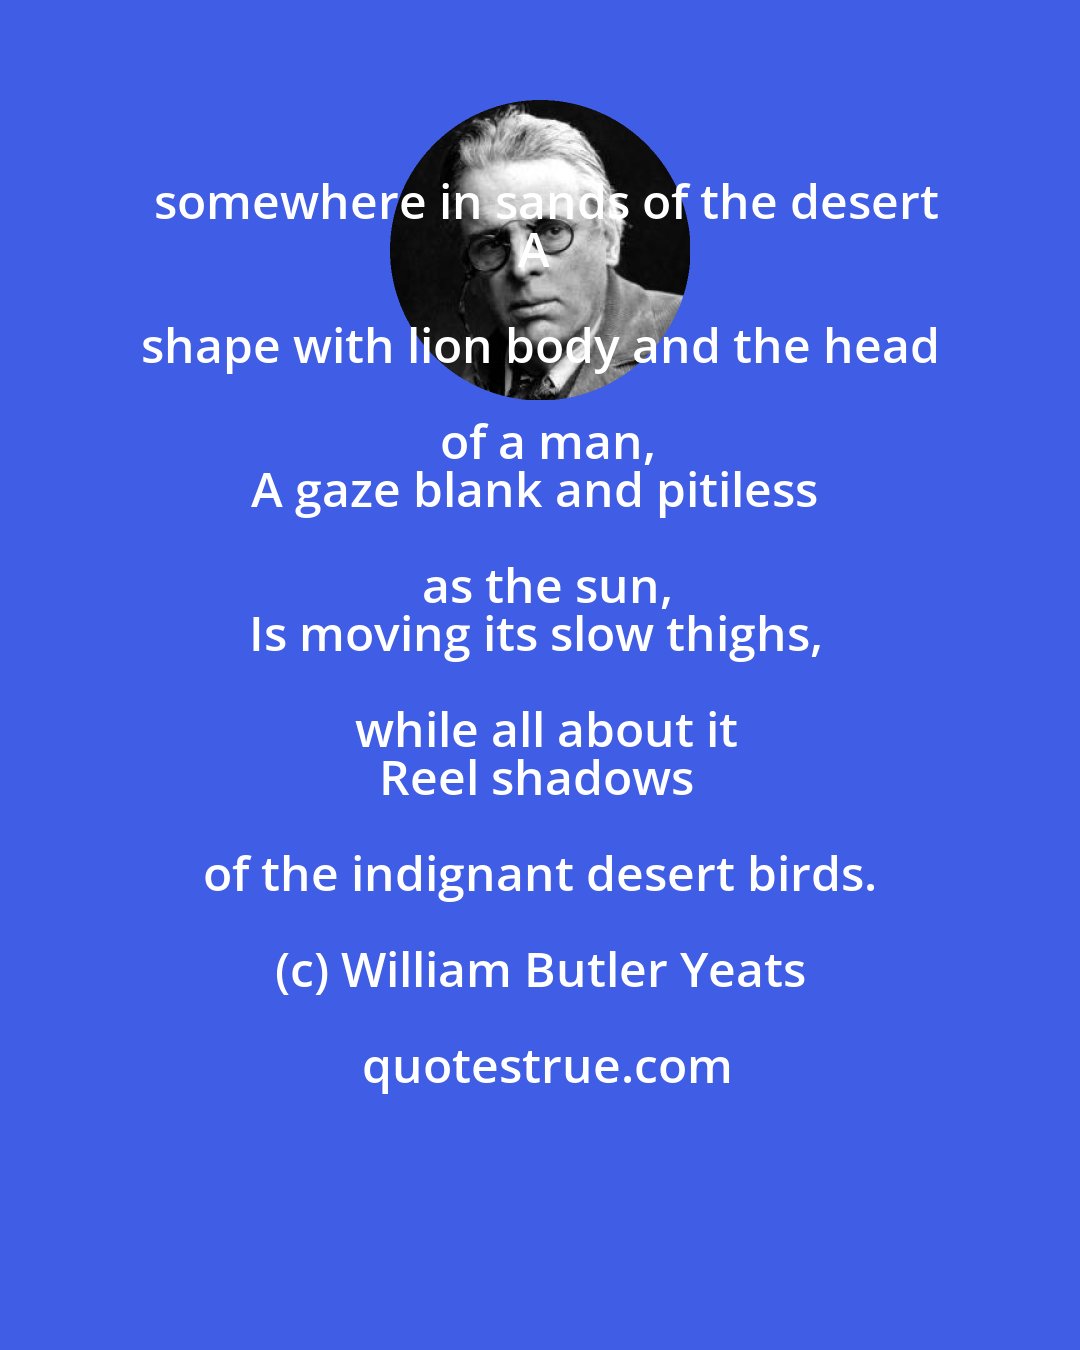 William Butler Yeats: somewhere in sands of the desert
A shape with lion body and the head of a man,
A gaze blank and pitiless as the sun,
Is moving its slow thighs, while all about it
Reel shadows of the indignant desert birds.